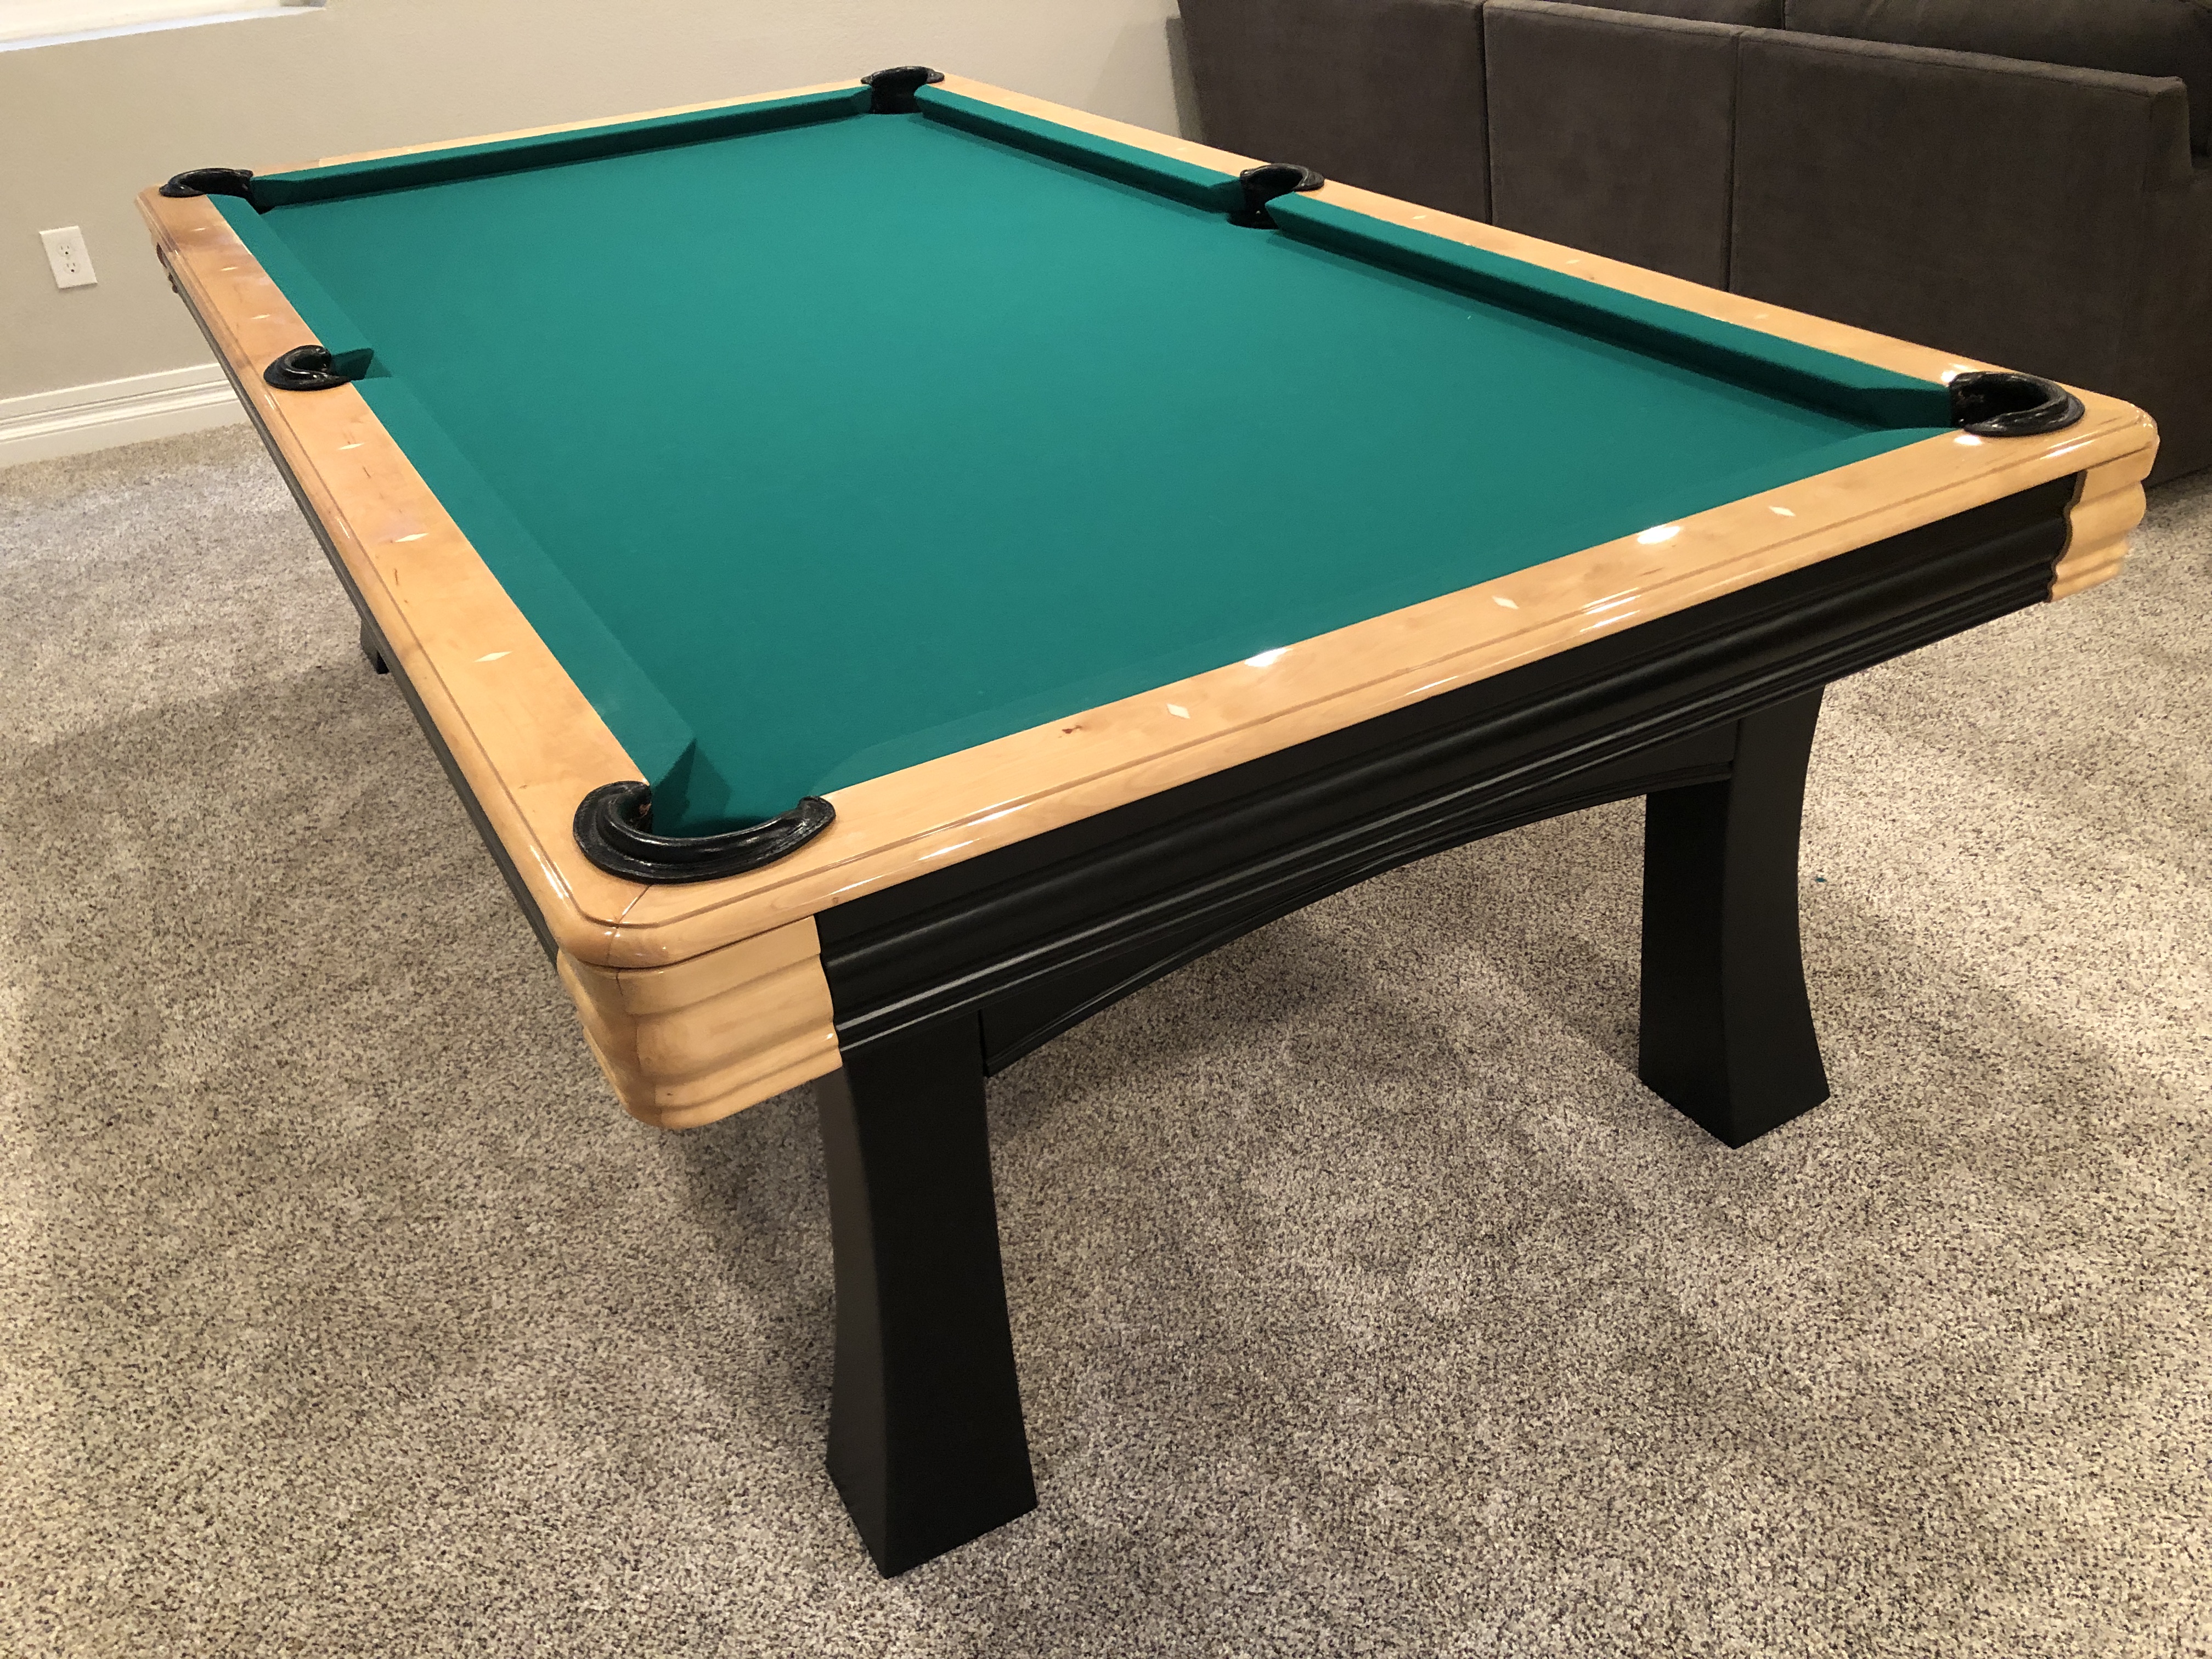 Used pool table for sale Denver: <br> 8' DLT 'Augusta' - Good condition